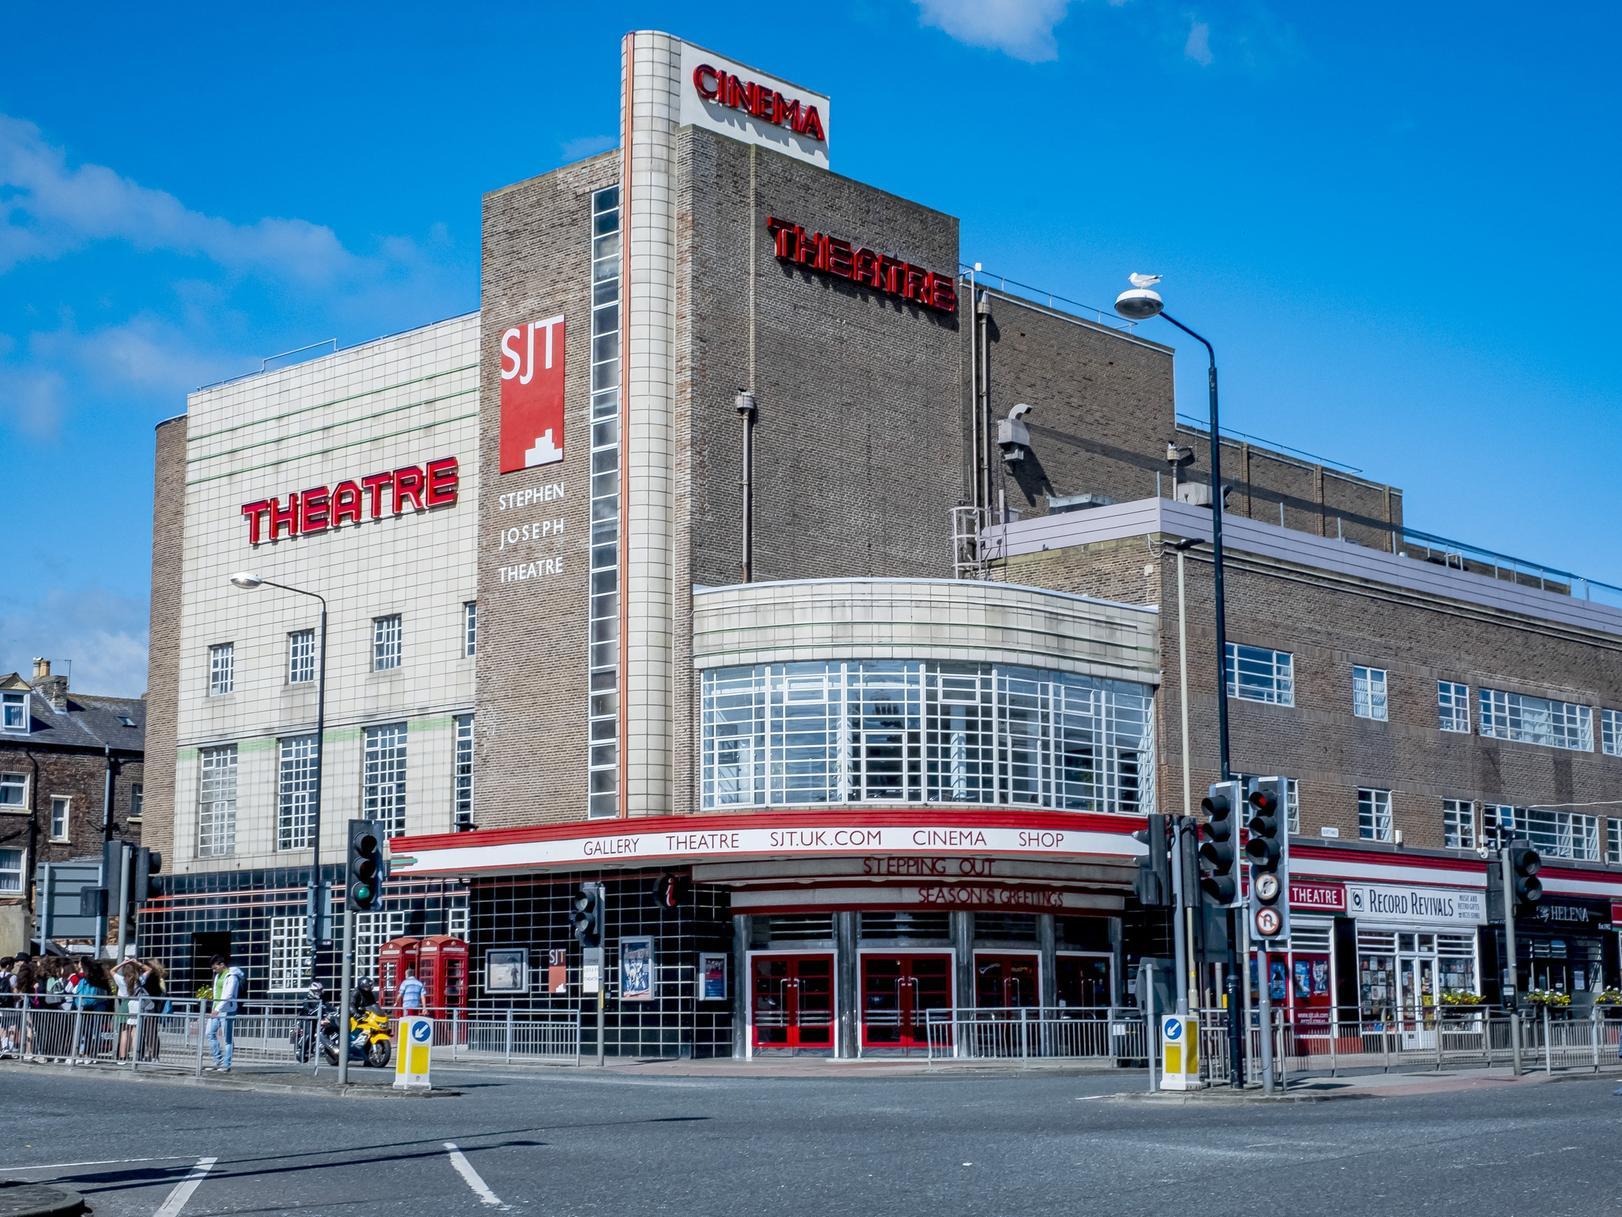 Scarborough's Stephen Joseph Theatre, opposite the railway station, was founded by Stephen Joseph in 1955.